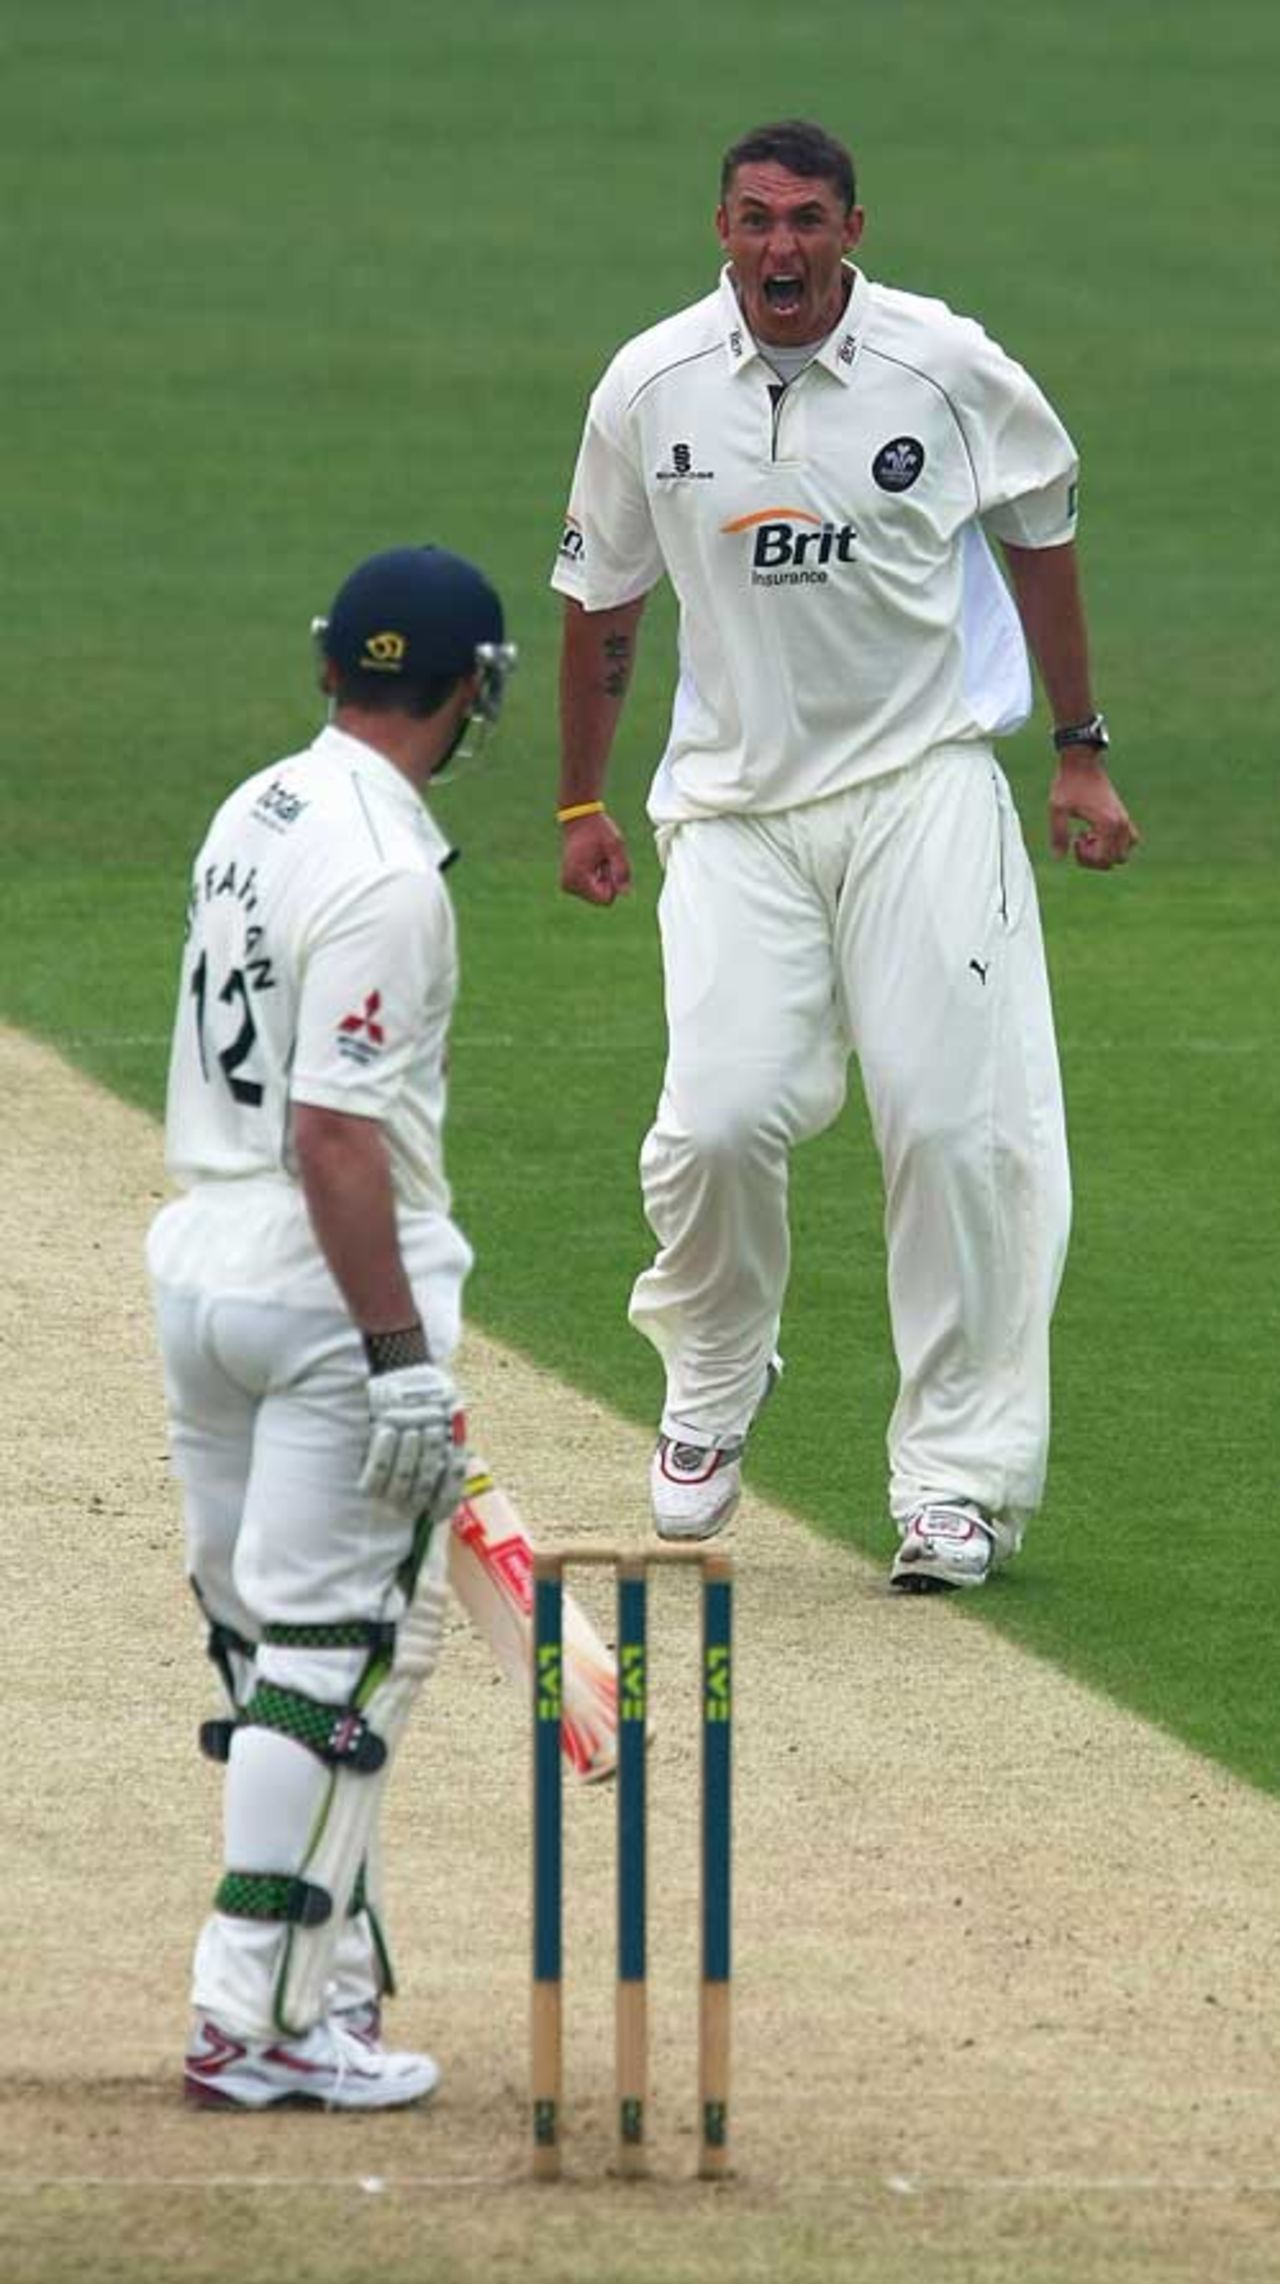 No holding back: Andre Nel celebrates his first wicket for Surrey, Surrey v Gloucestershire, County Championship Division Two, The Oval, April 15, 2009